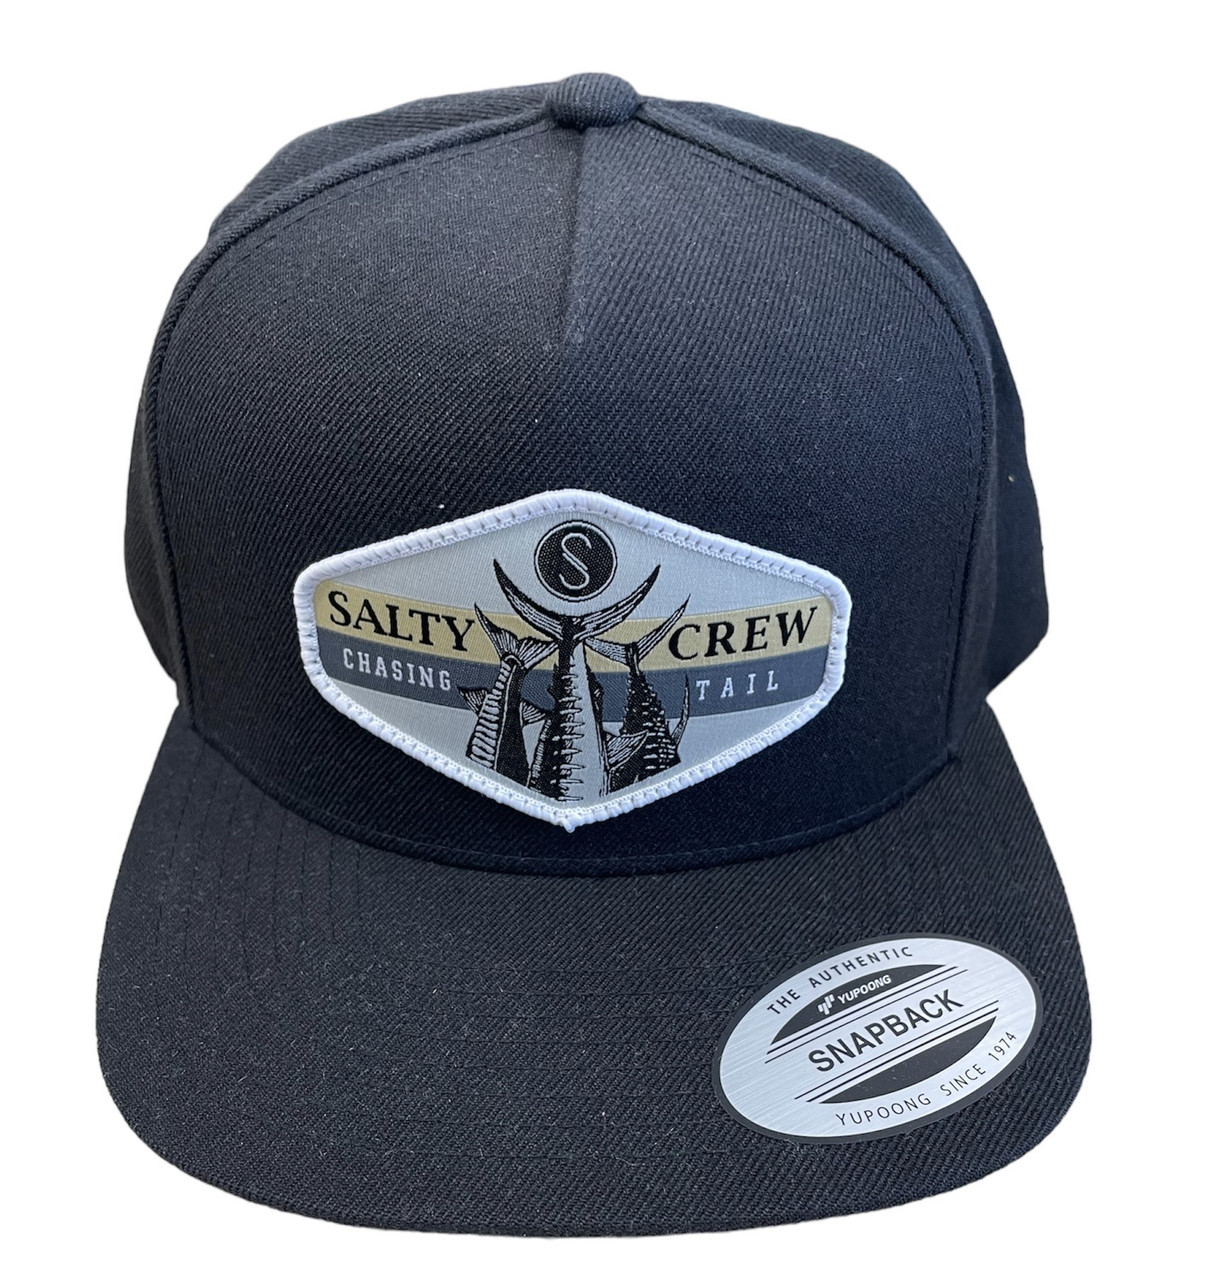 Lids Salty Crew High Tail Snapback Hat - Oatmeal